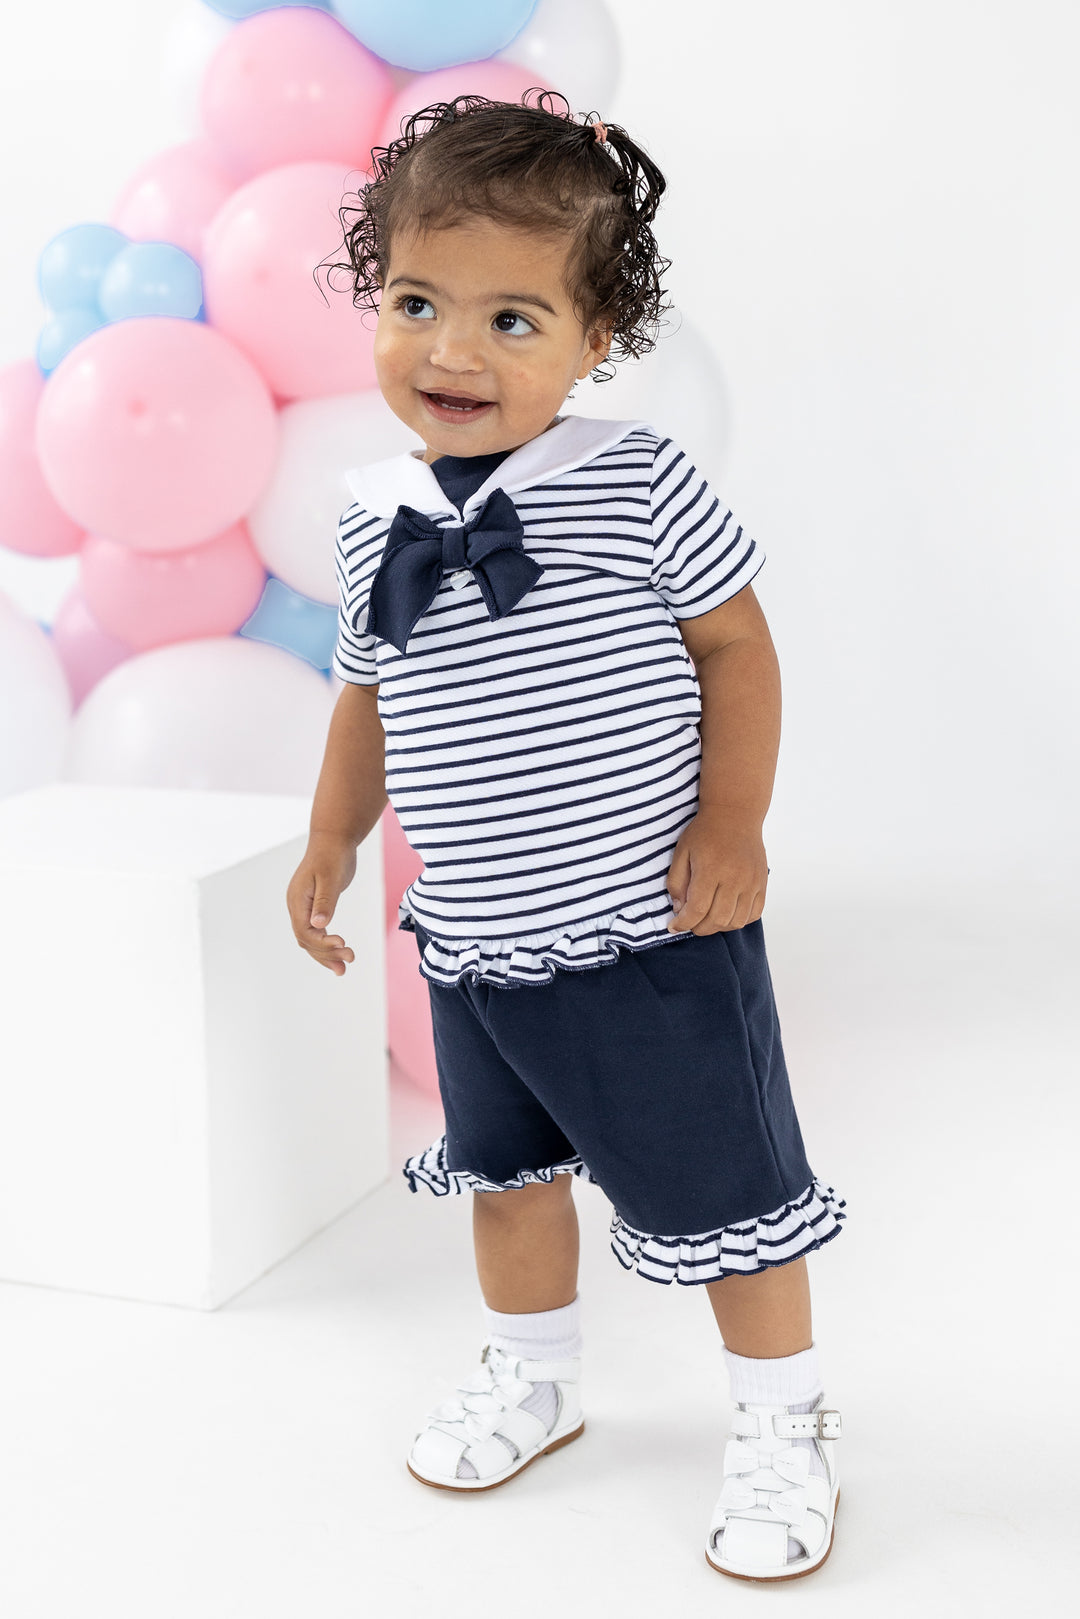 Blues Baby PREORDER "Celeste" Navy Striped Sailor Blouse & Shorts | Millie and John